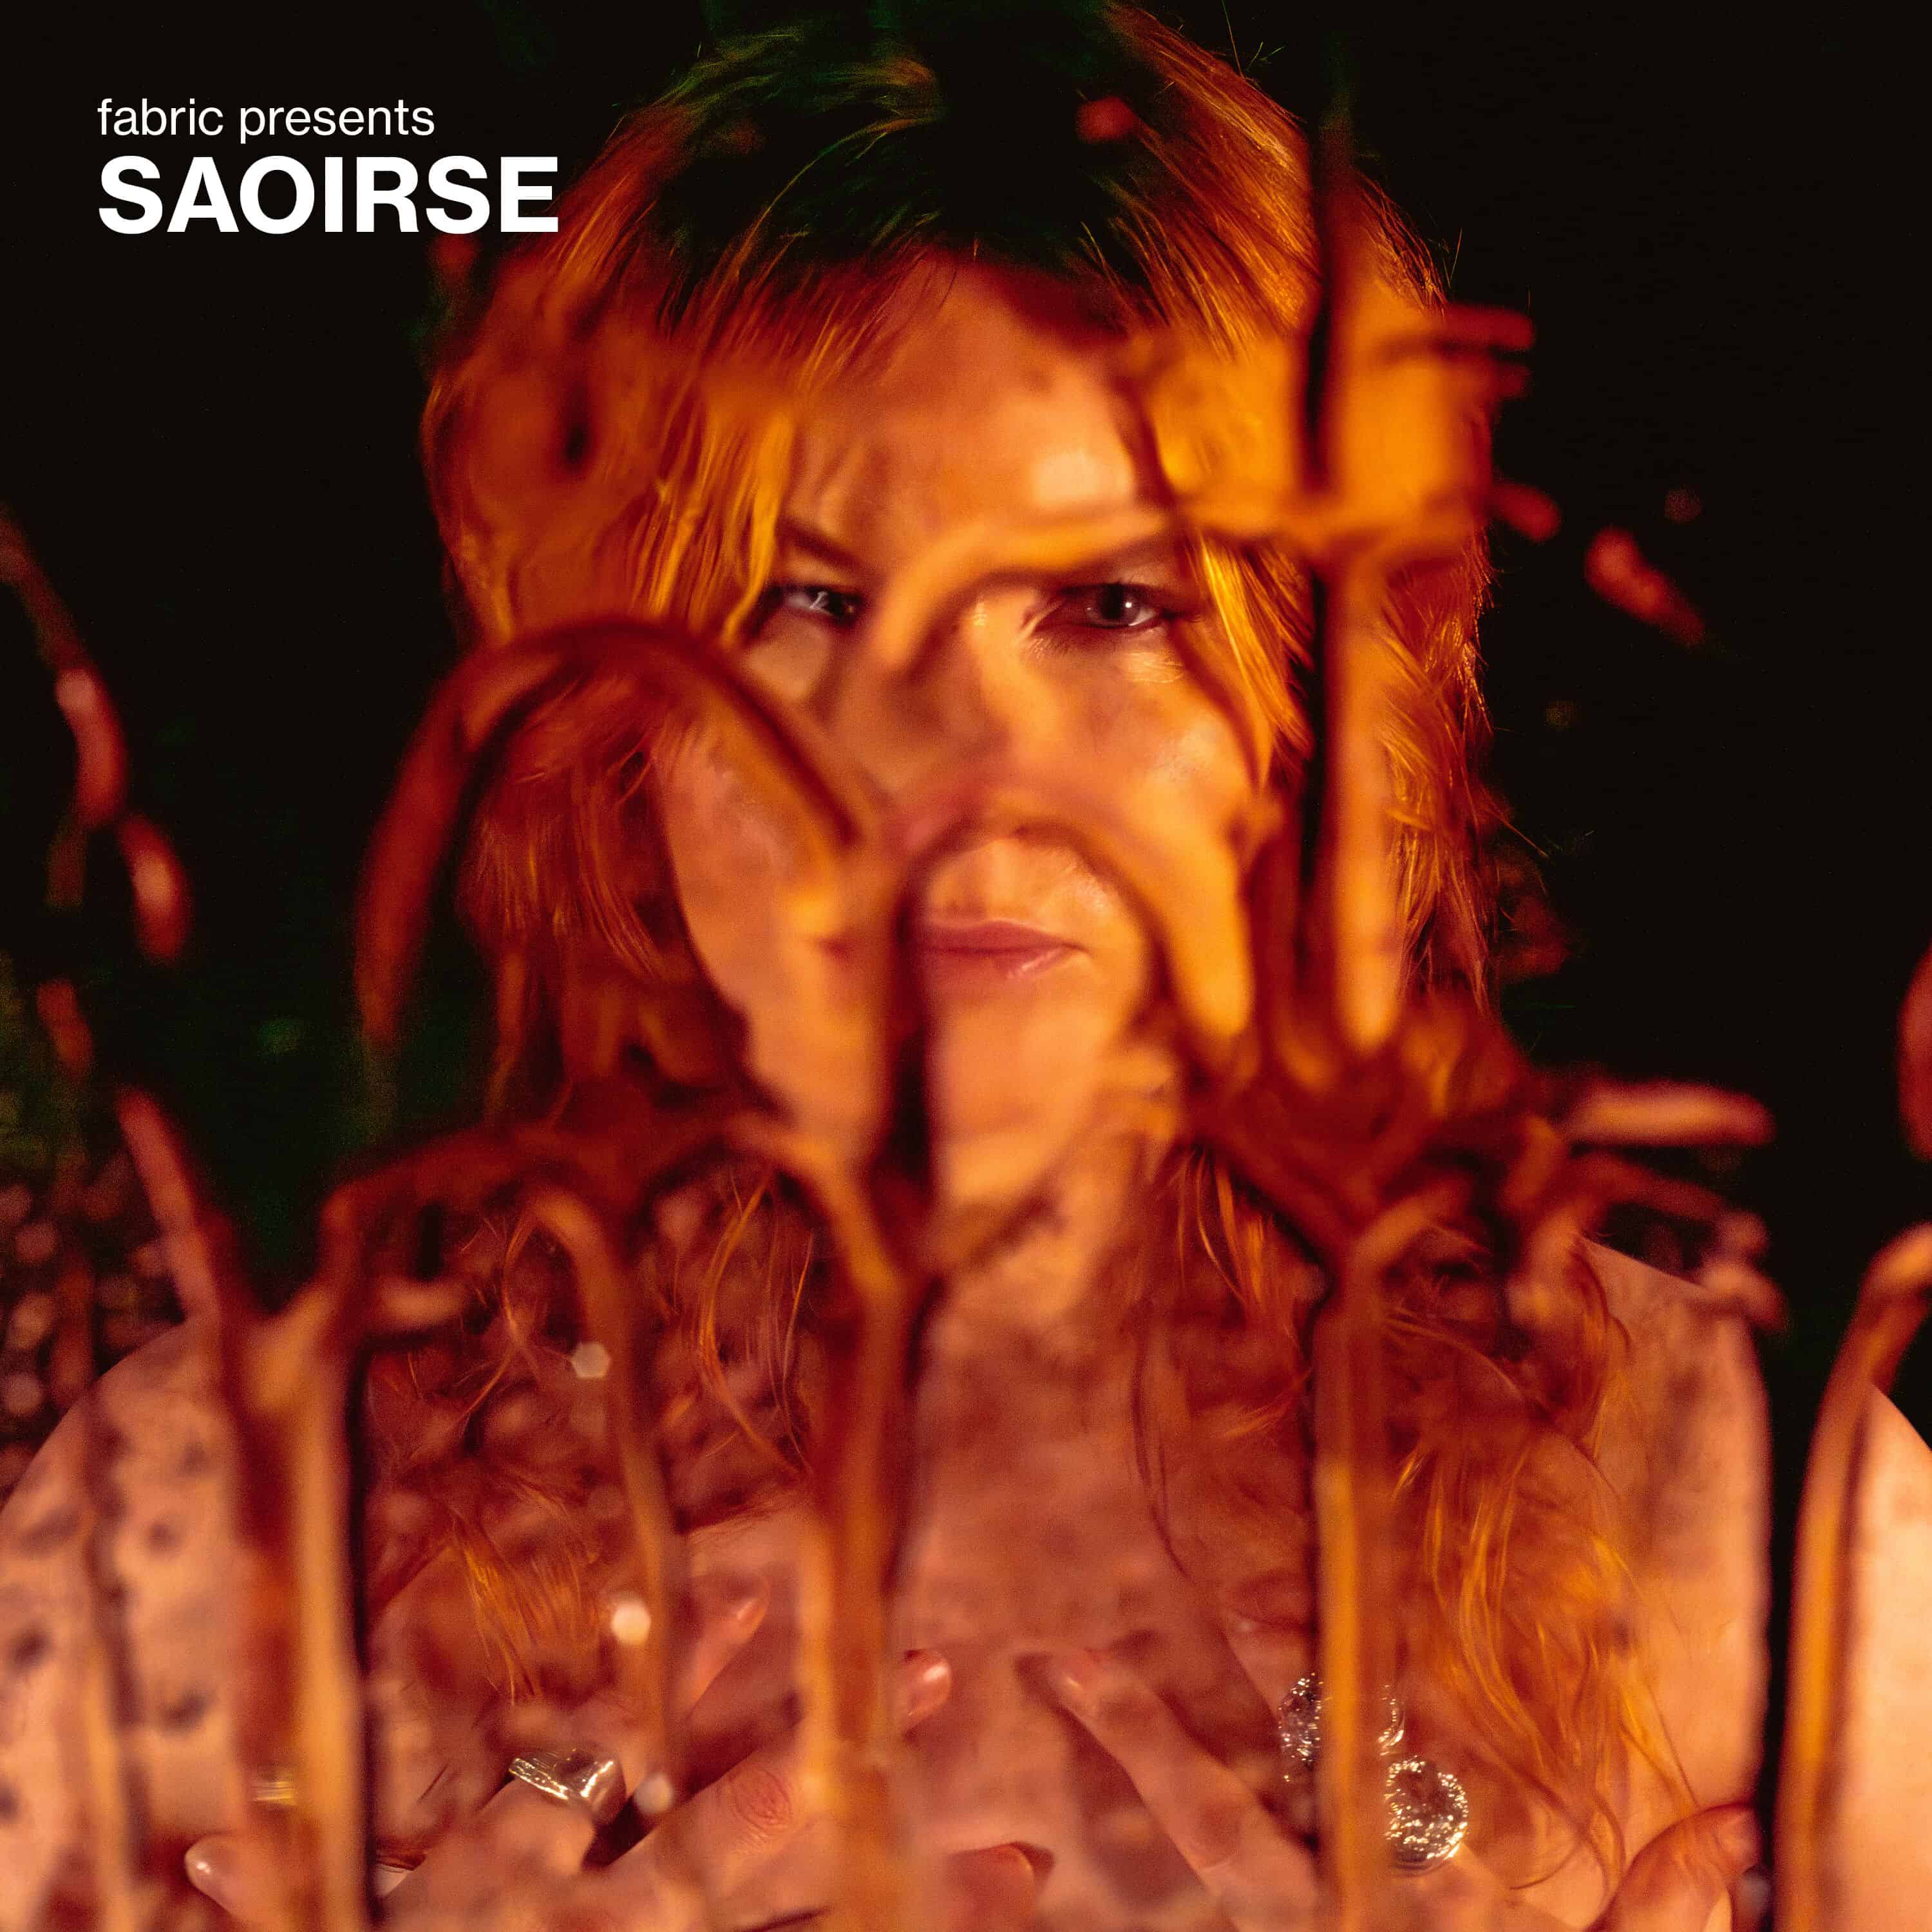 Download Saoirse - fabric presents Saoirse on Electrobuzz